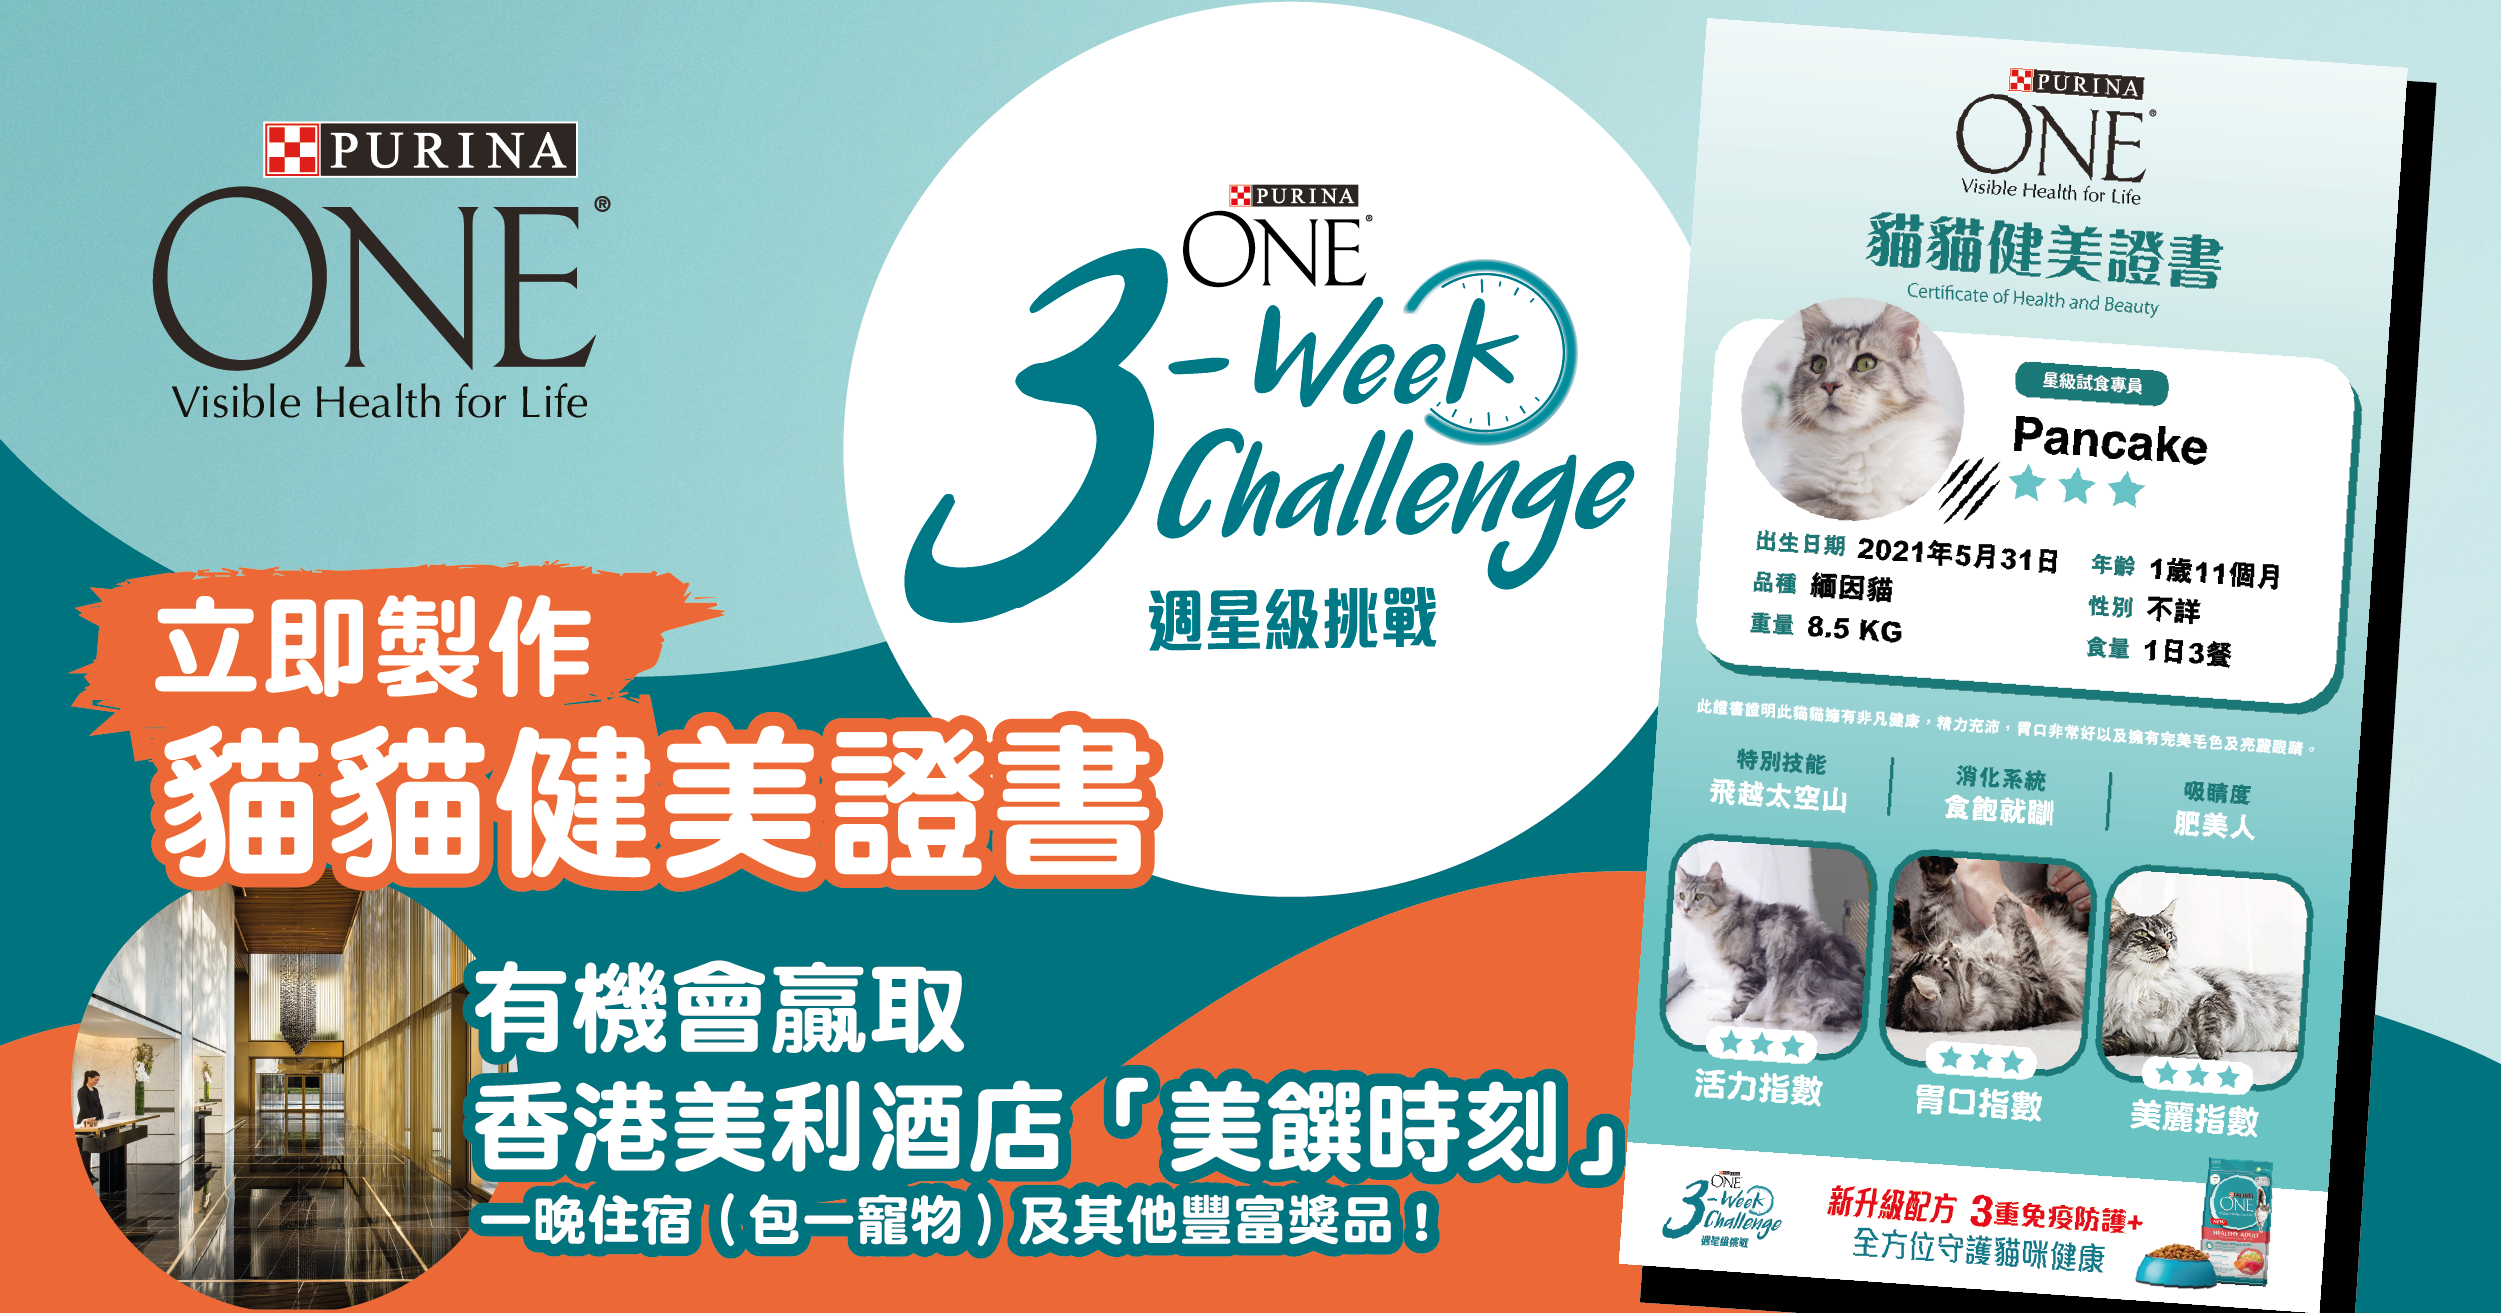 PURINA ONE®  3 Week Challenge Registration Form | Create the PURINA ONE Health Certification for Cats